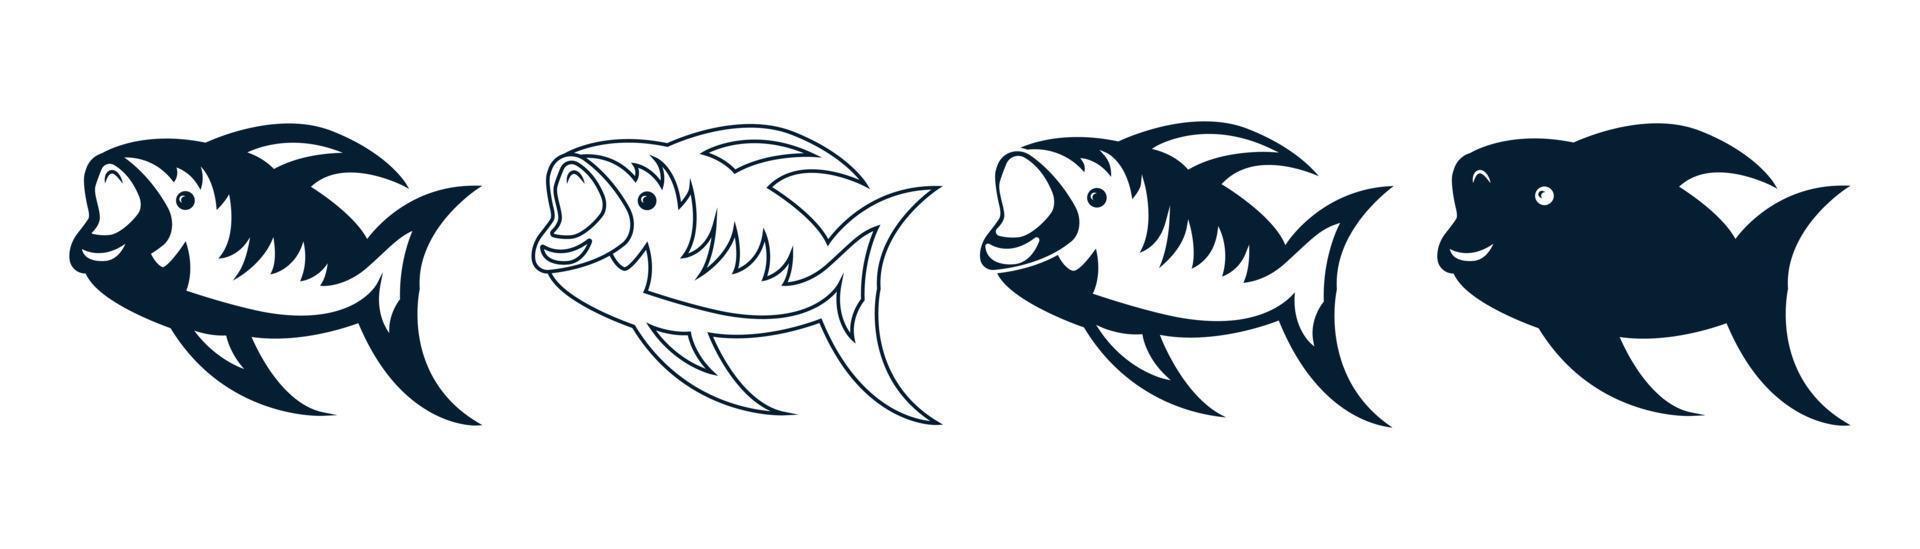 Fish icon set illustration. Illustration icon related to water animals. Simple design editable vector